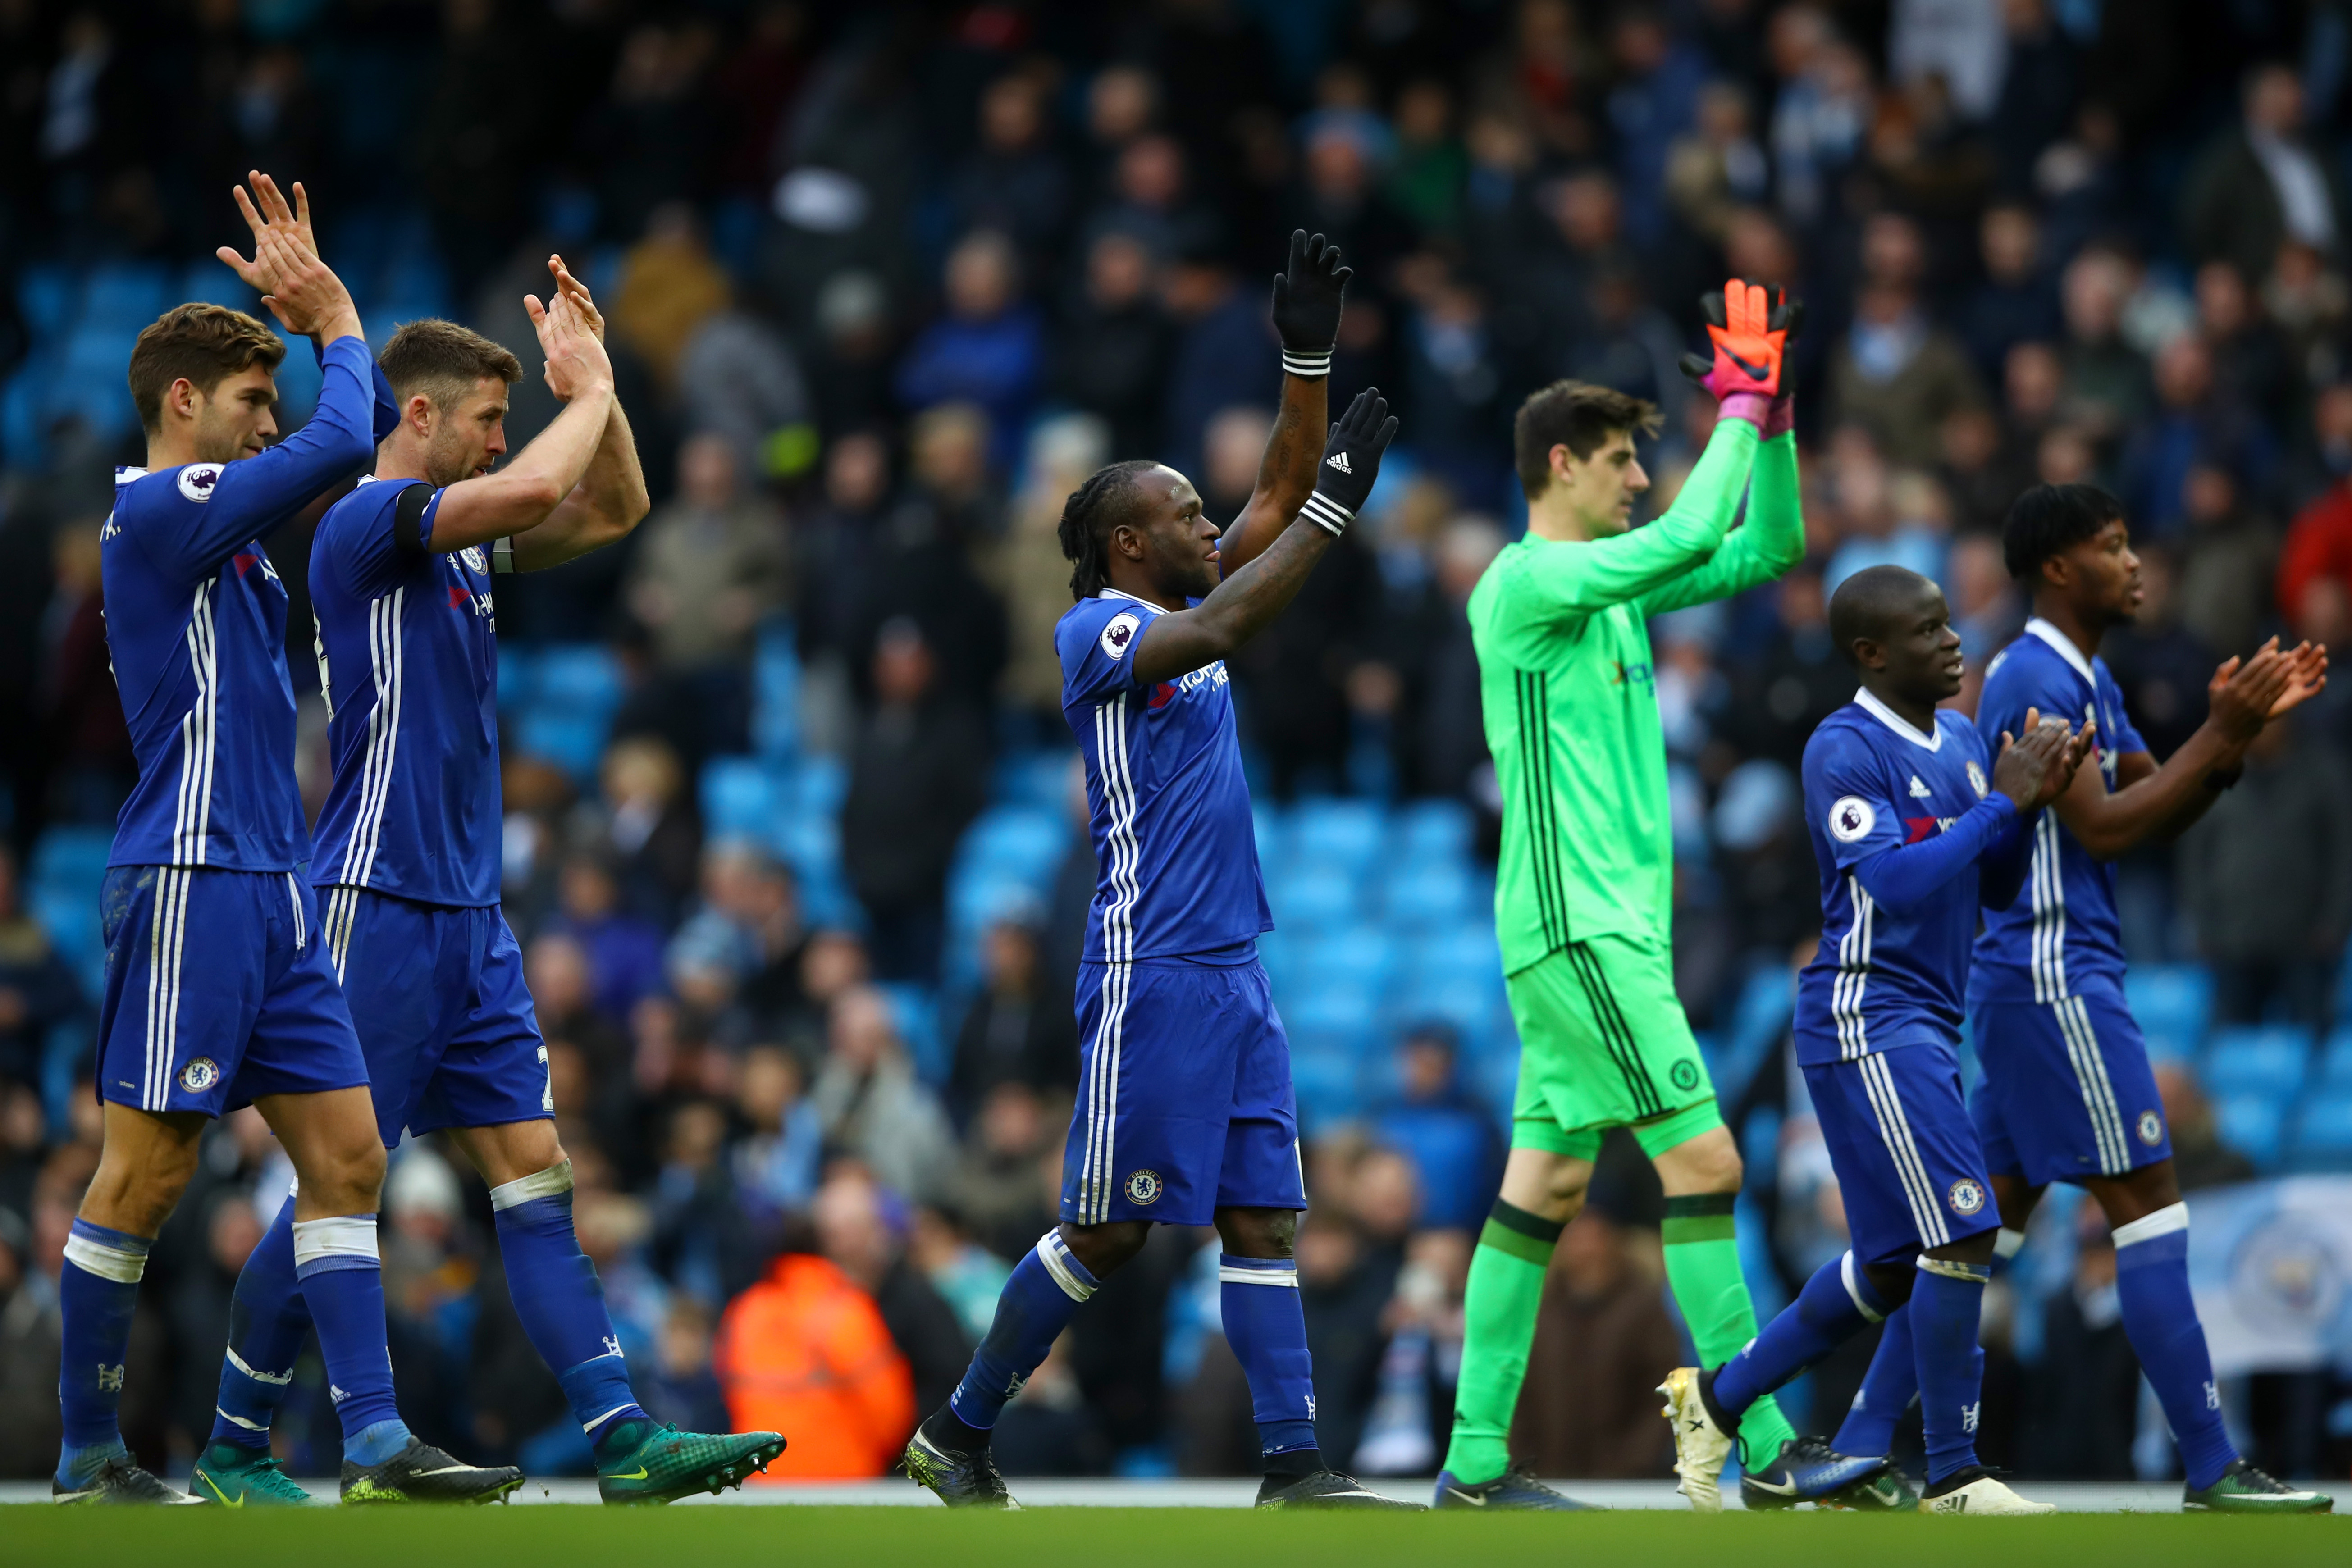 MANCHESTER, ENGLAND - DECEMBER 03:  Chelsea players applaud supporters after their 3-1 win in the Premier League match between Manchester City and Chelsea at Etihad Stadium on December 3, 2016 in Manchester, England.  (Photo by Clive Brunskill/Getty Images)